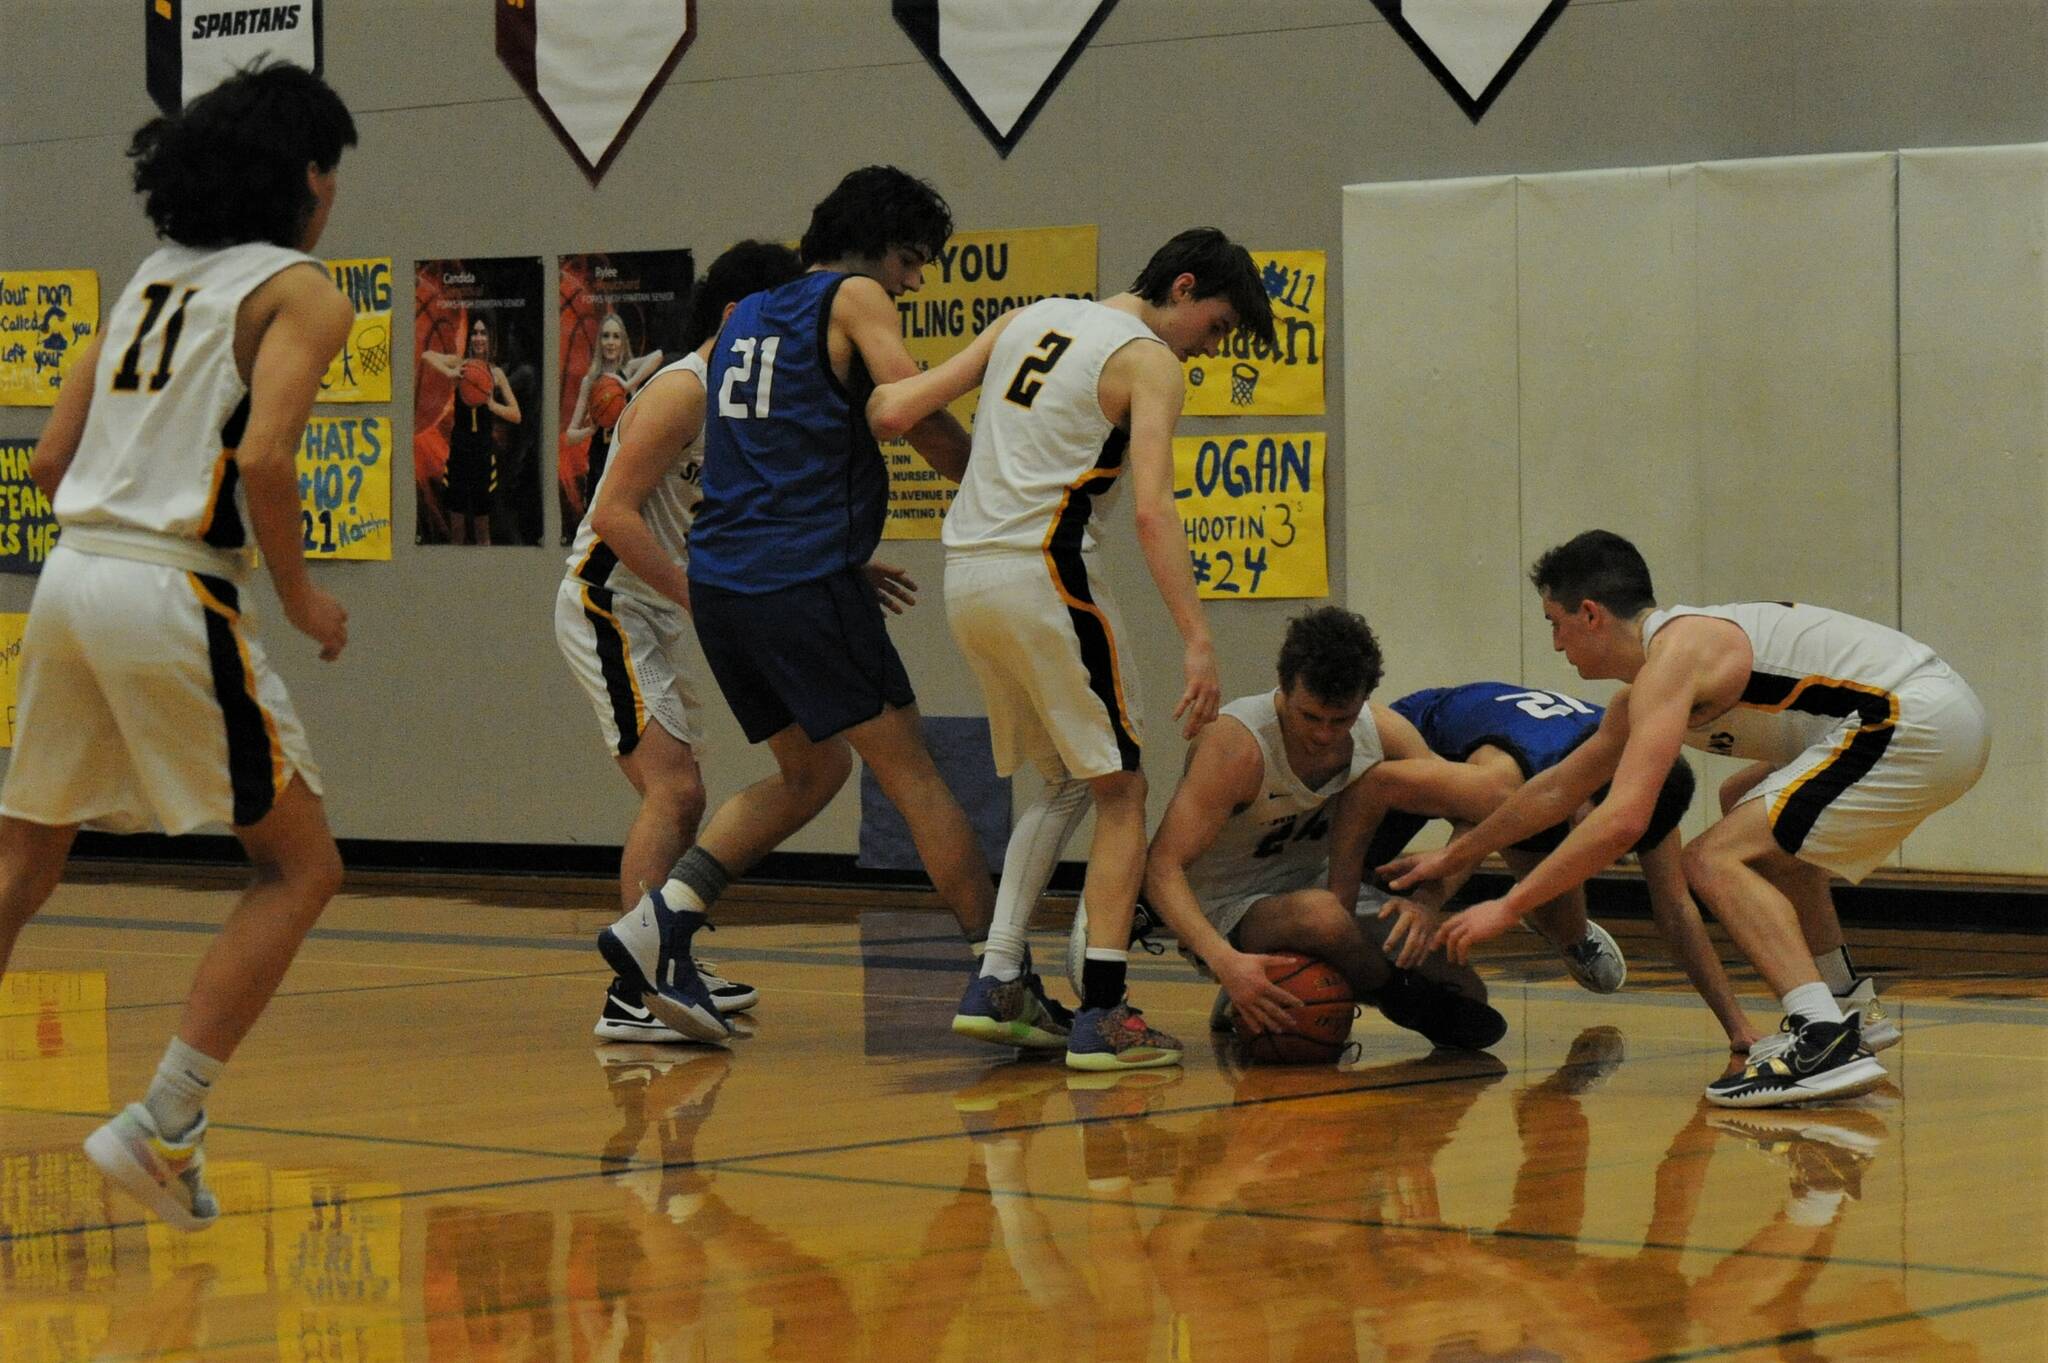 On the defense for Forks on the floor is Spartan senior Logan Olson. Other Spartans from left are Aidan Salazar, Landin Davis, Keaton Northcutt, and senior Riley Pursley. Forks defeated Toutle Lake 71 to 66 to advance in district play. Photo by Lonnie Archibald